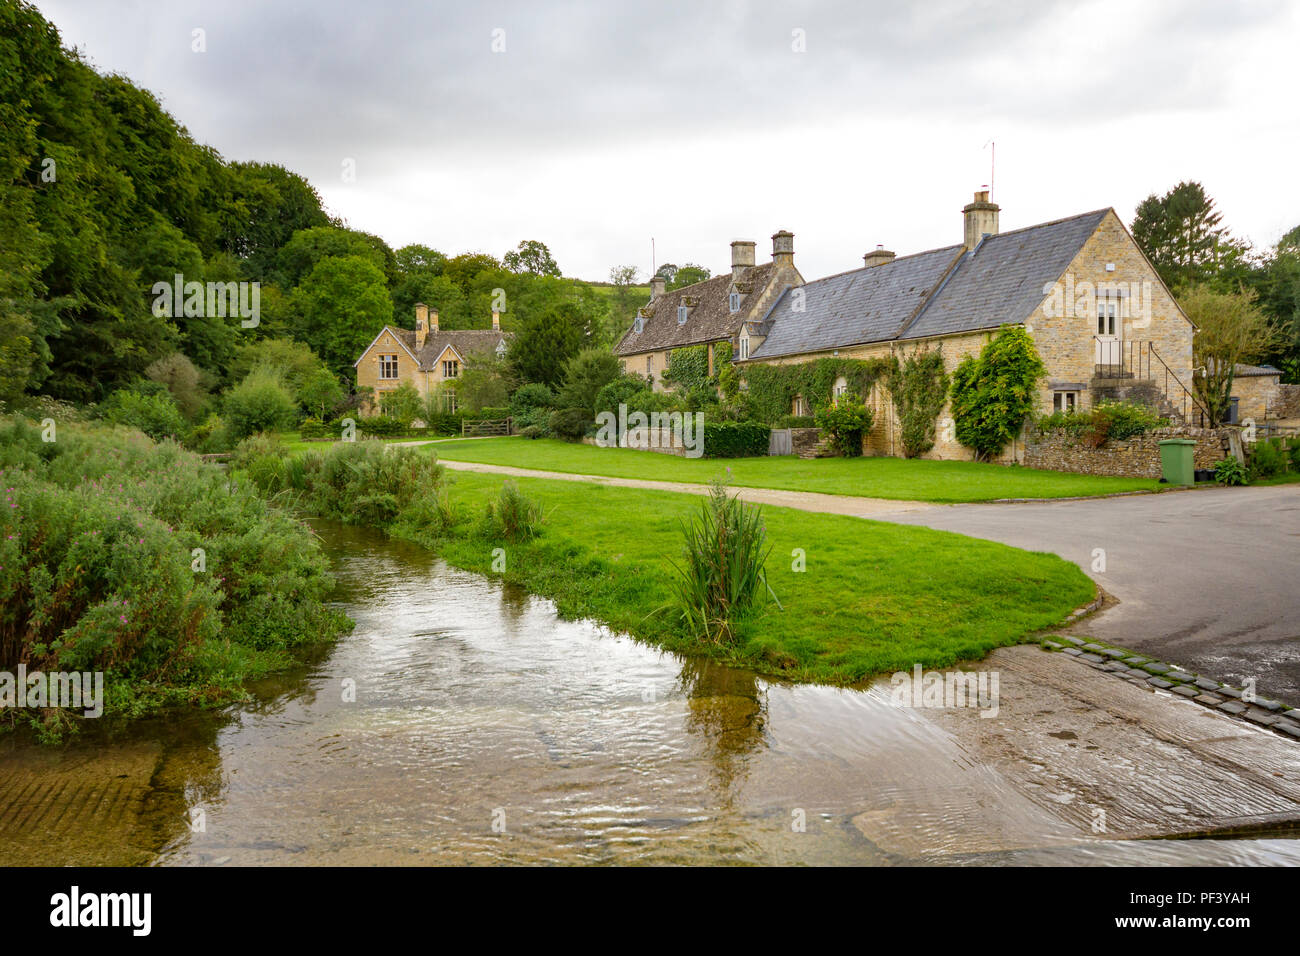 Upper Slaughter in den Cotswolds, Gloucestershire, England. Stockfoto